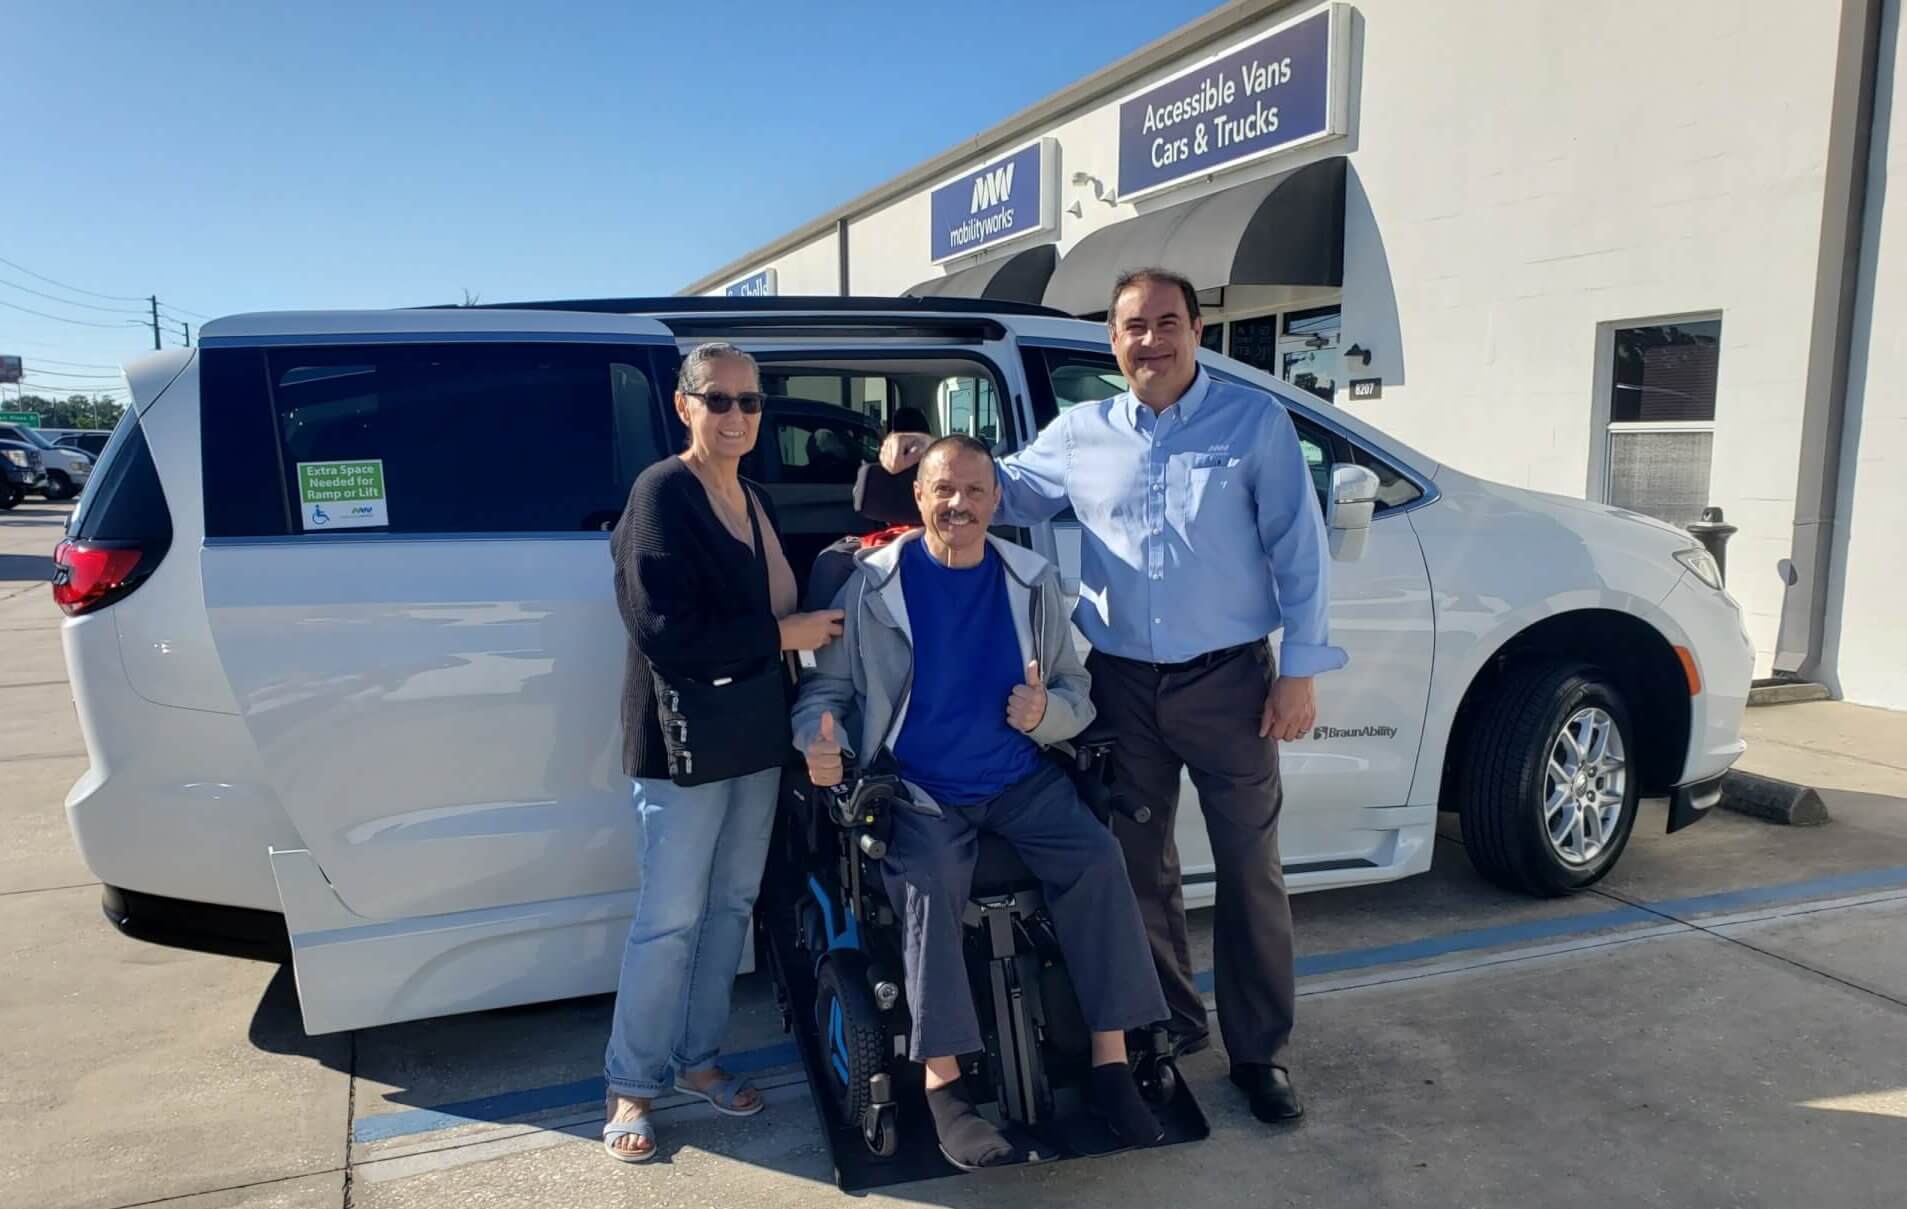 Paul with some happy customers in front of a new van.